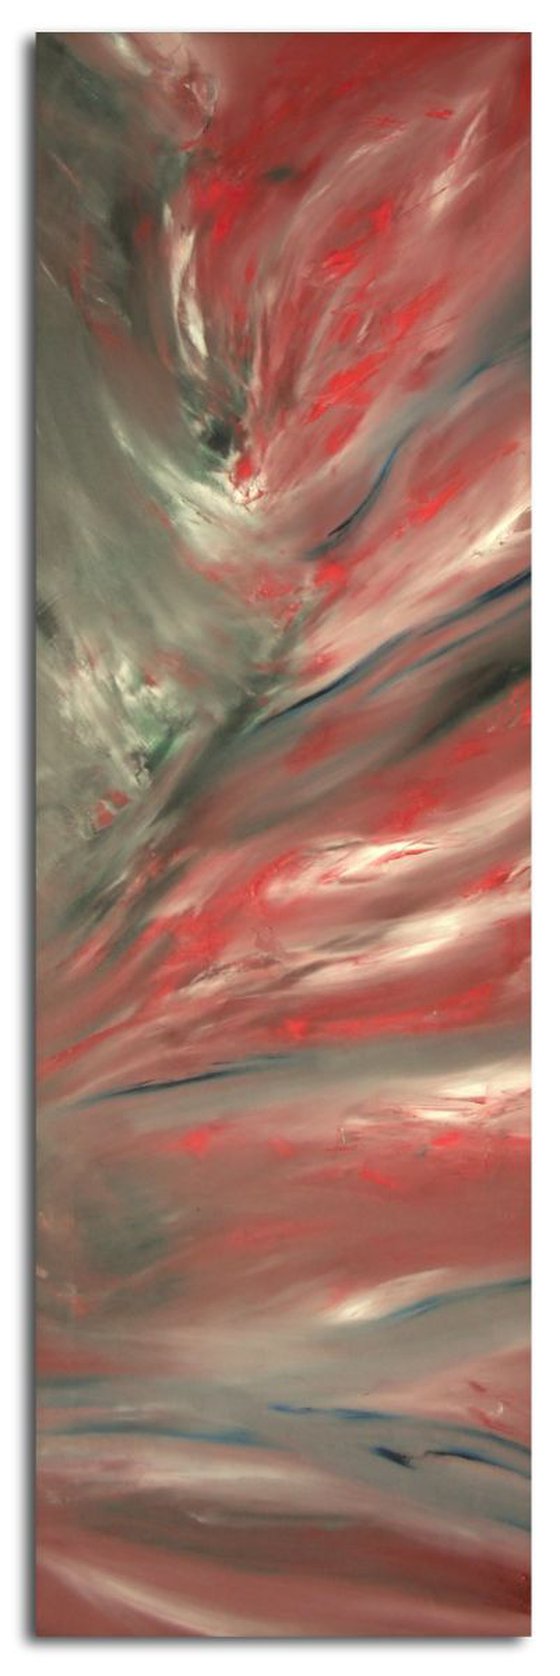 Scarlet shadow - 120x40 cm, LARGE XL, Original abstract painting, oil on canvas